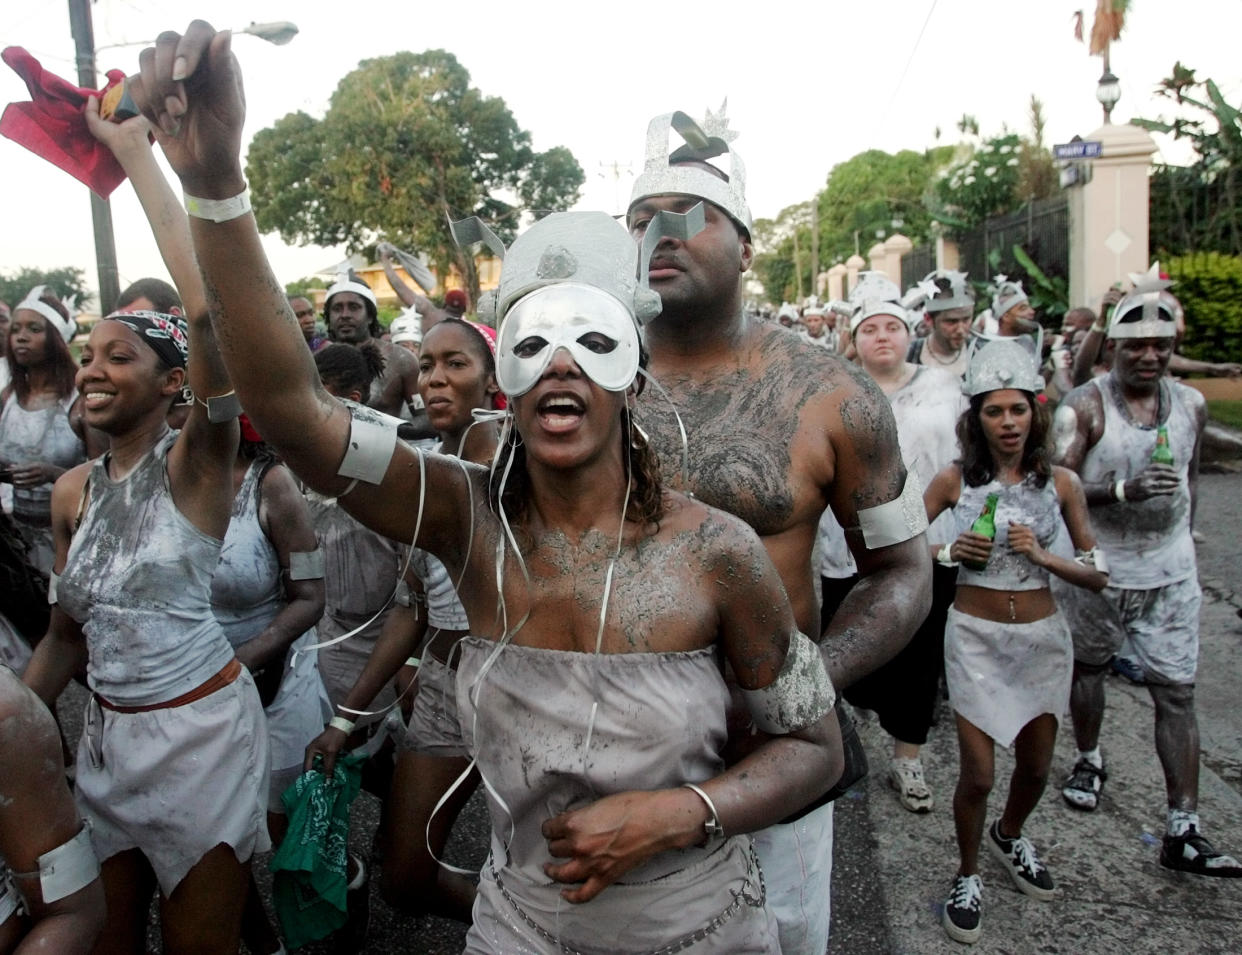 Revelers parade during a 'J Overt' (The Beginning) parade as part of Carnival festivities in Port of Spain, Trinidad and Tobago, February 7, 2005. REUTERS/Jorge Silva  JS/HB